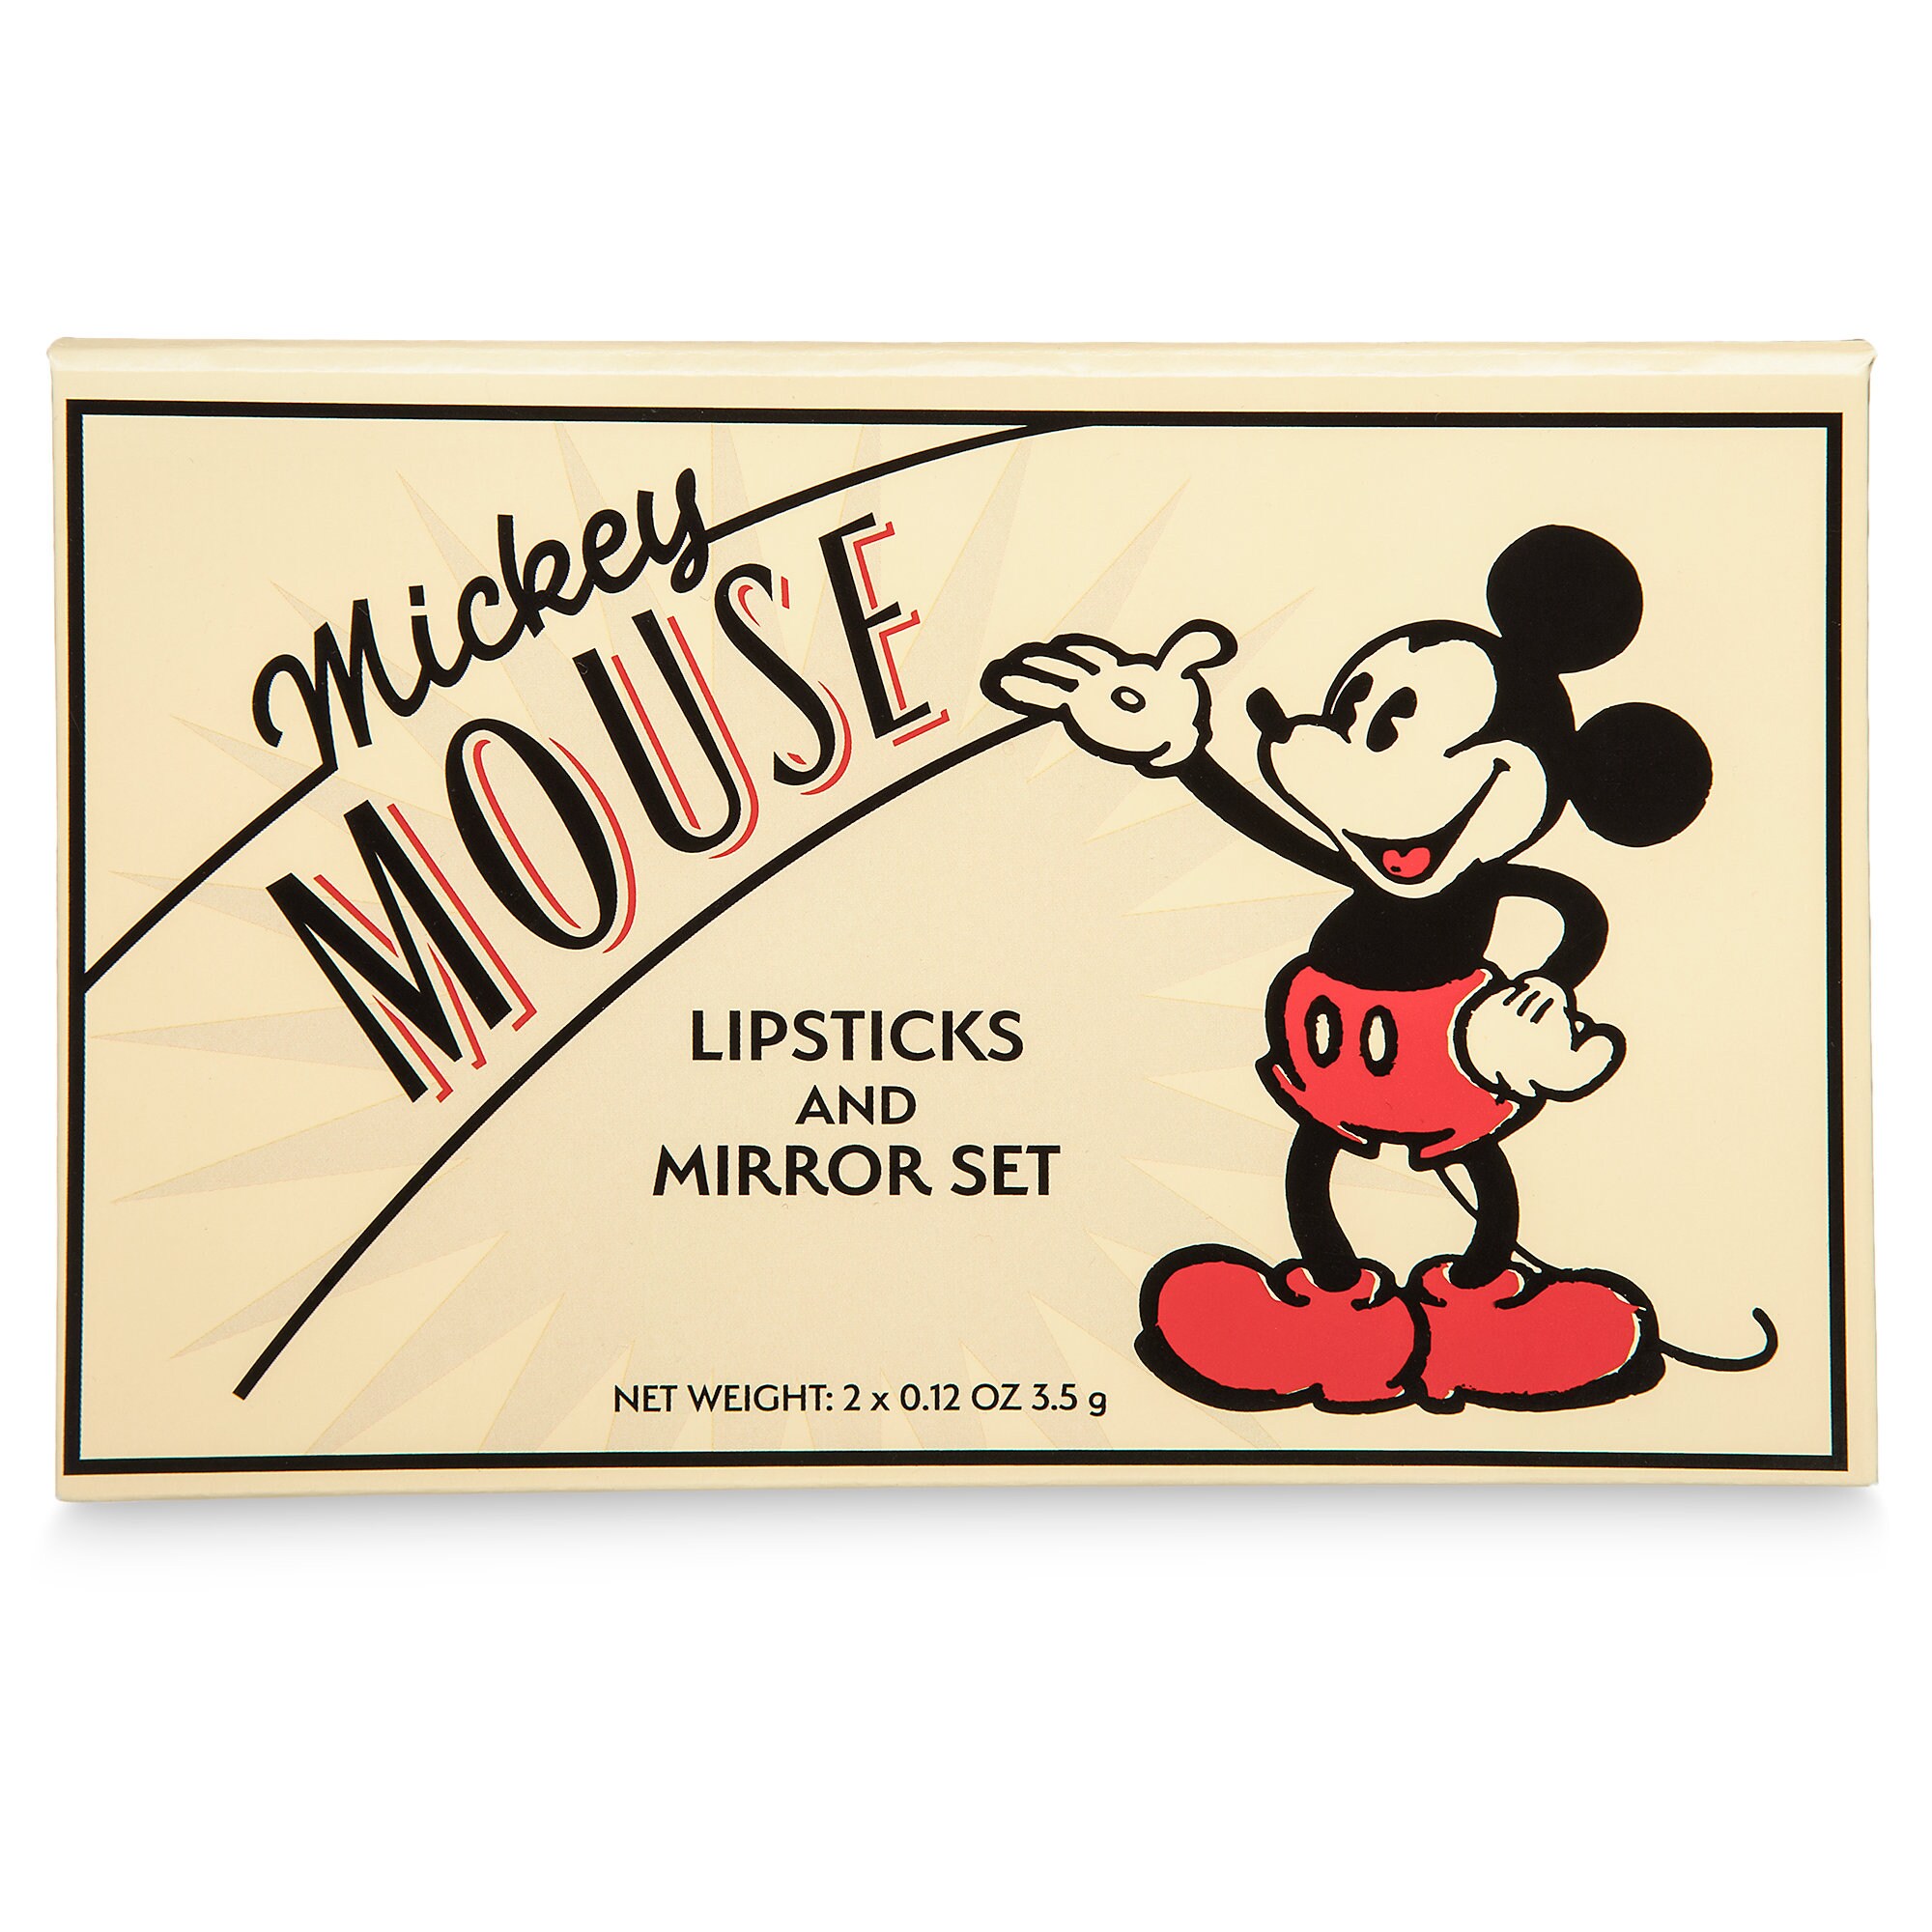 Mickey Mouse Lipsticks and Mirror Set by Bésame - Limited Edition